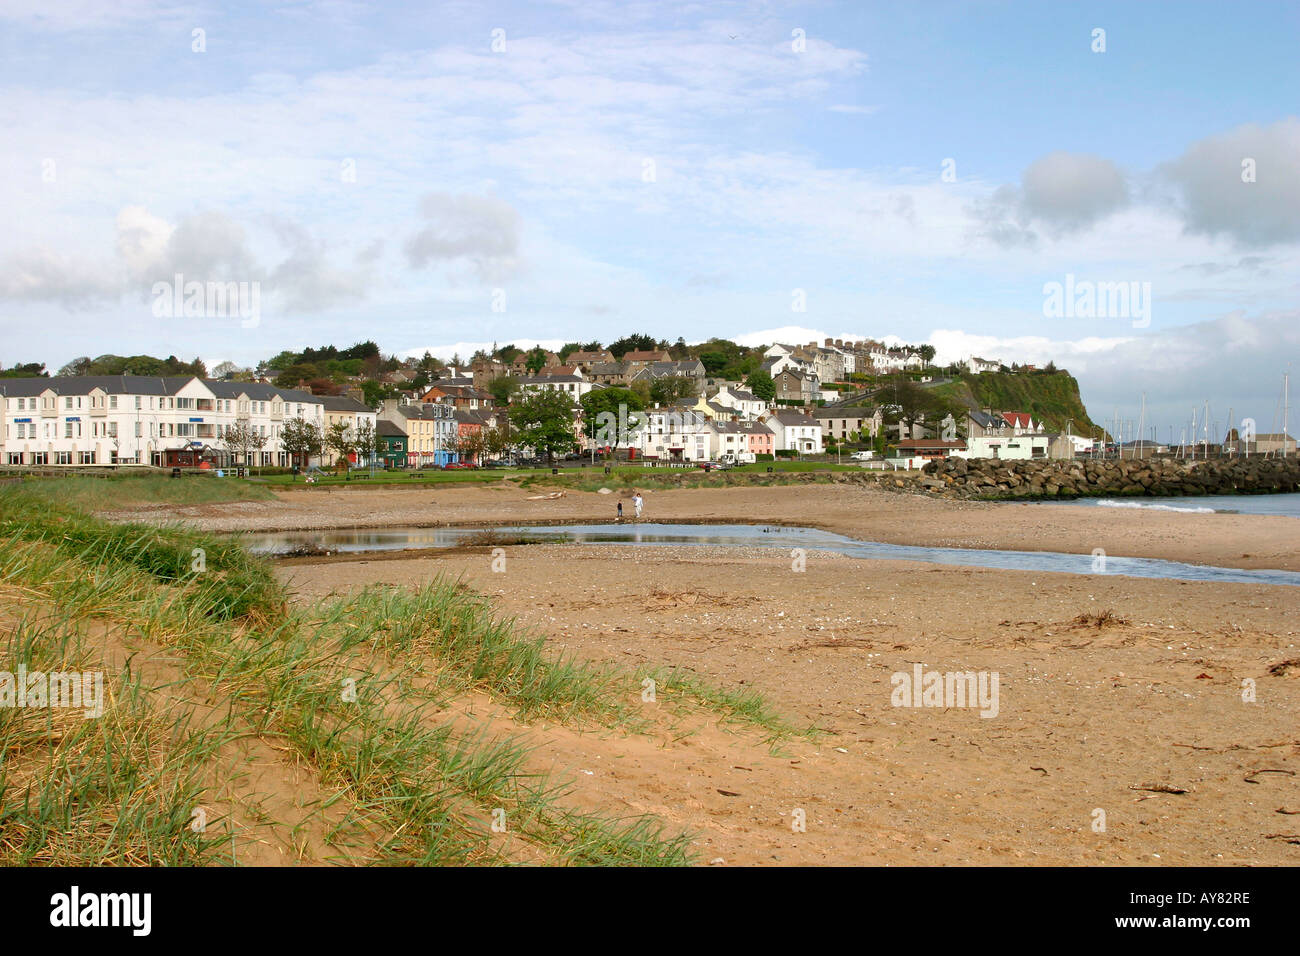 County Antrim Ballycastle seaside resort town from the strand Stock Photo